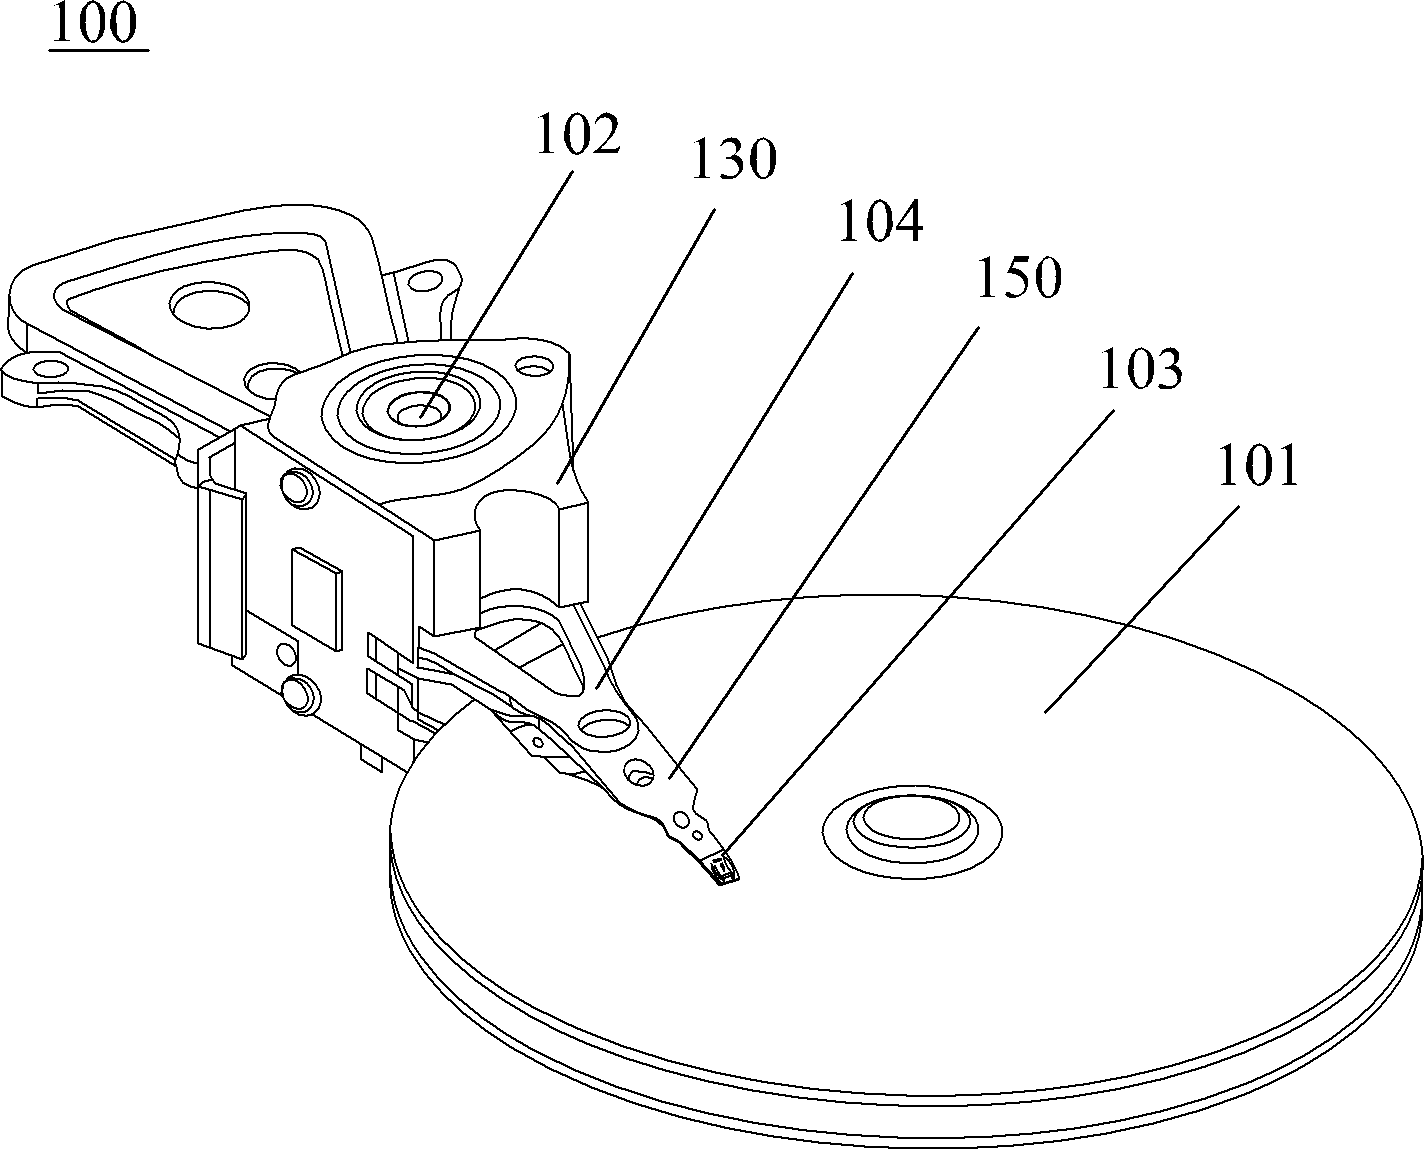 Soldering device for forming electrical soldering point in magnetic disc driver